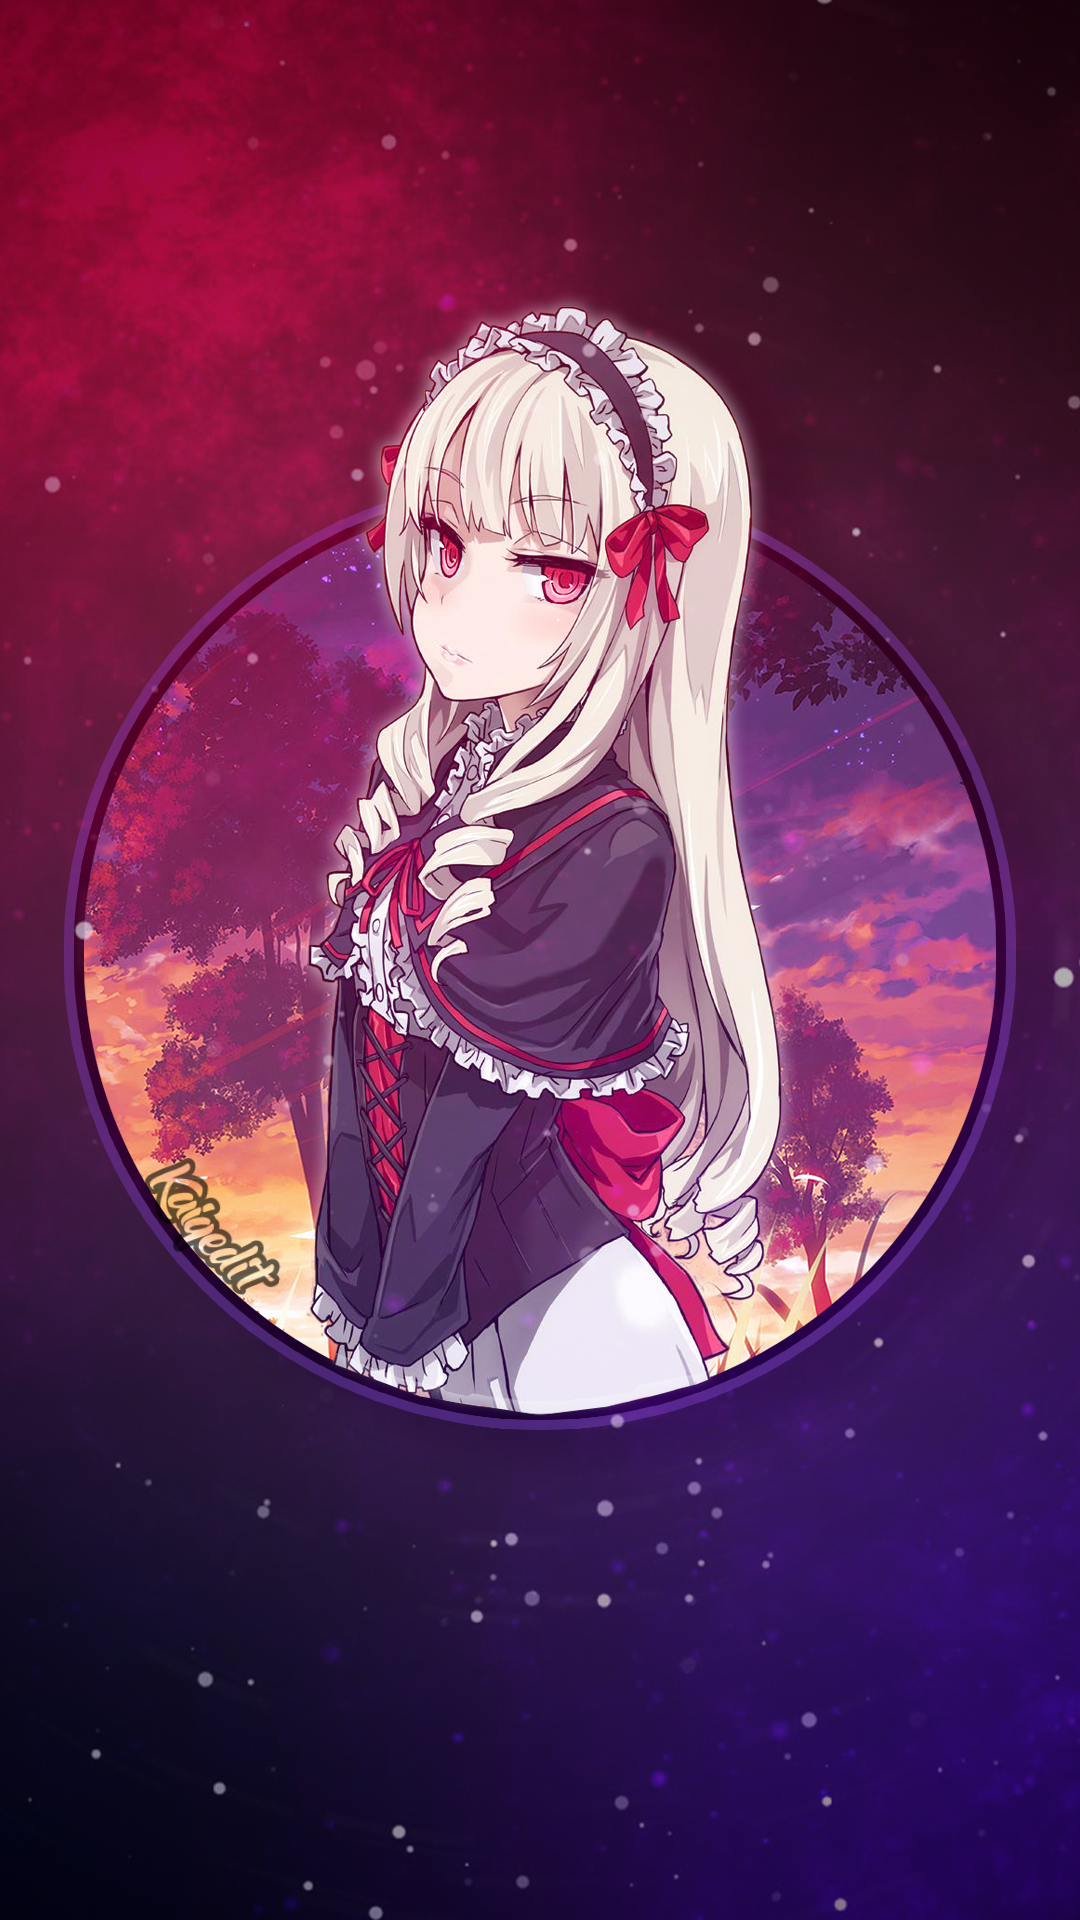 Anime 1080x1920 white hair maid purple background anime girls picture-in-picture